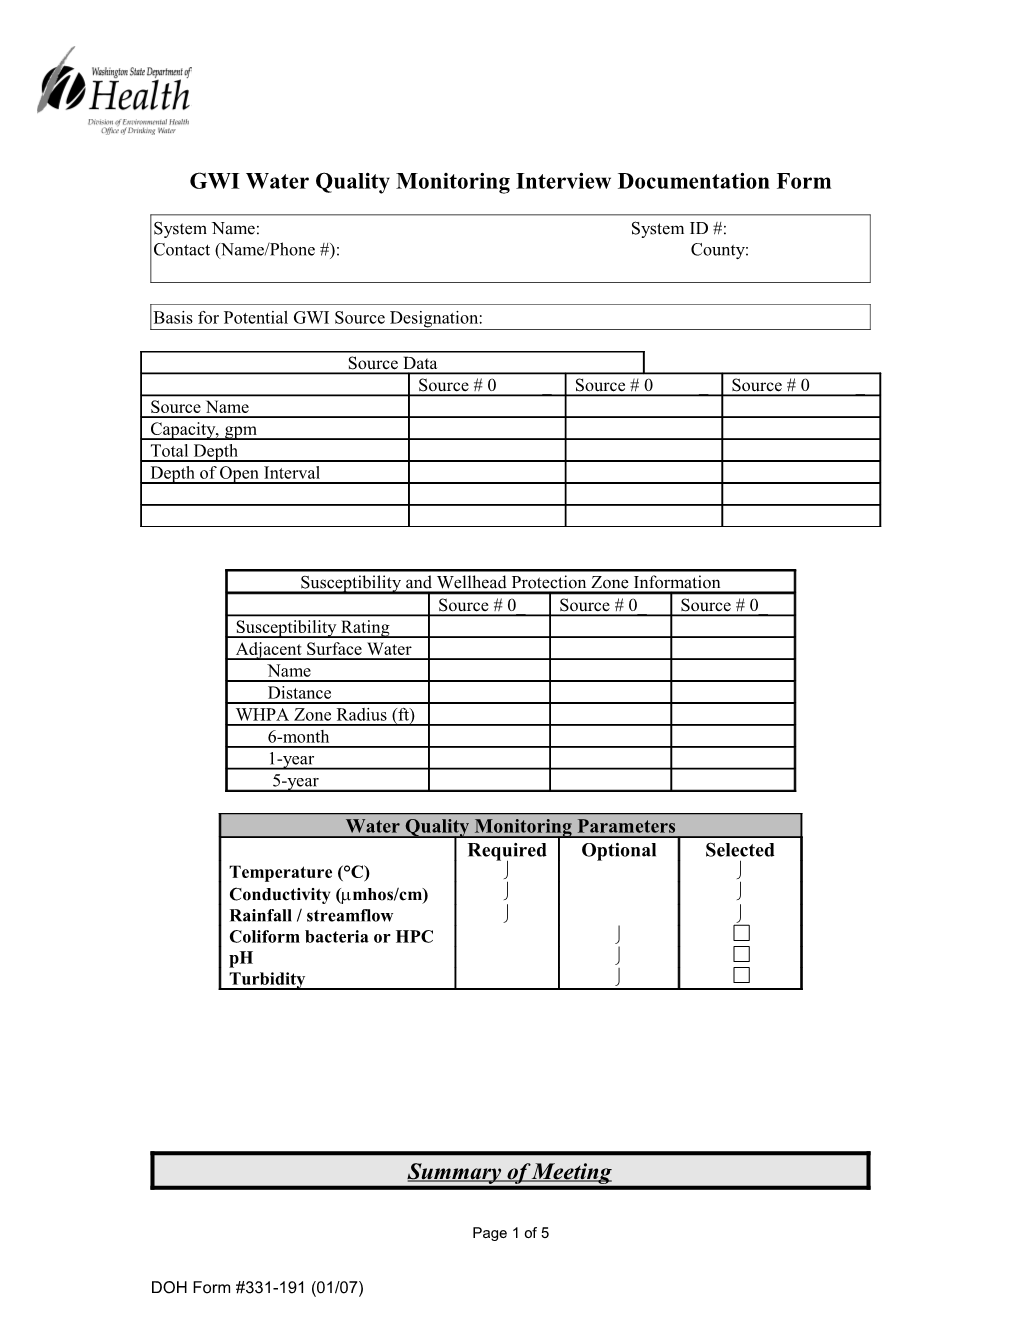 GWI Water Quality Sampling Interview Format